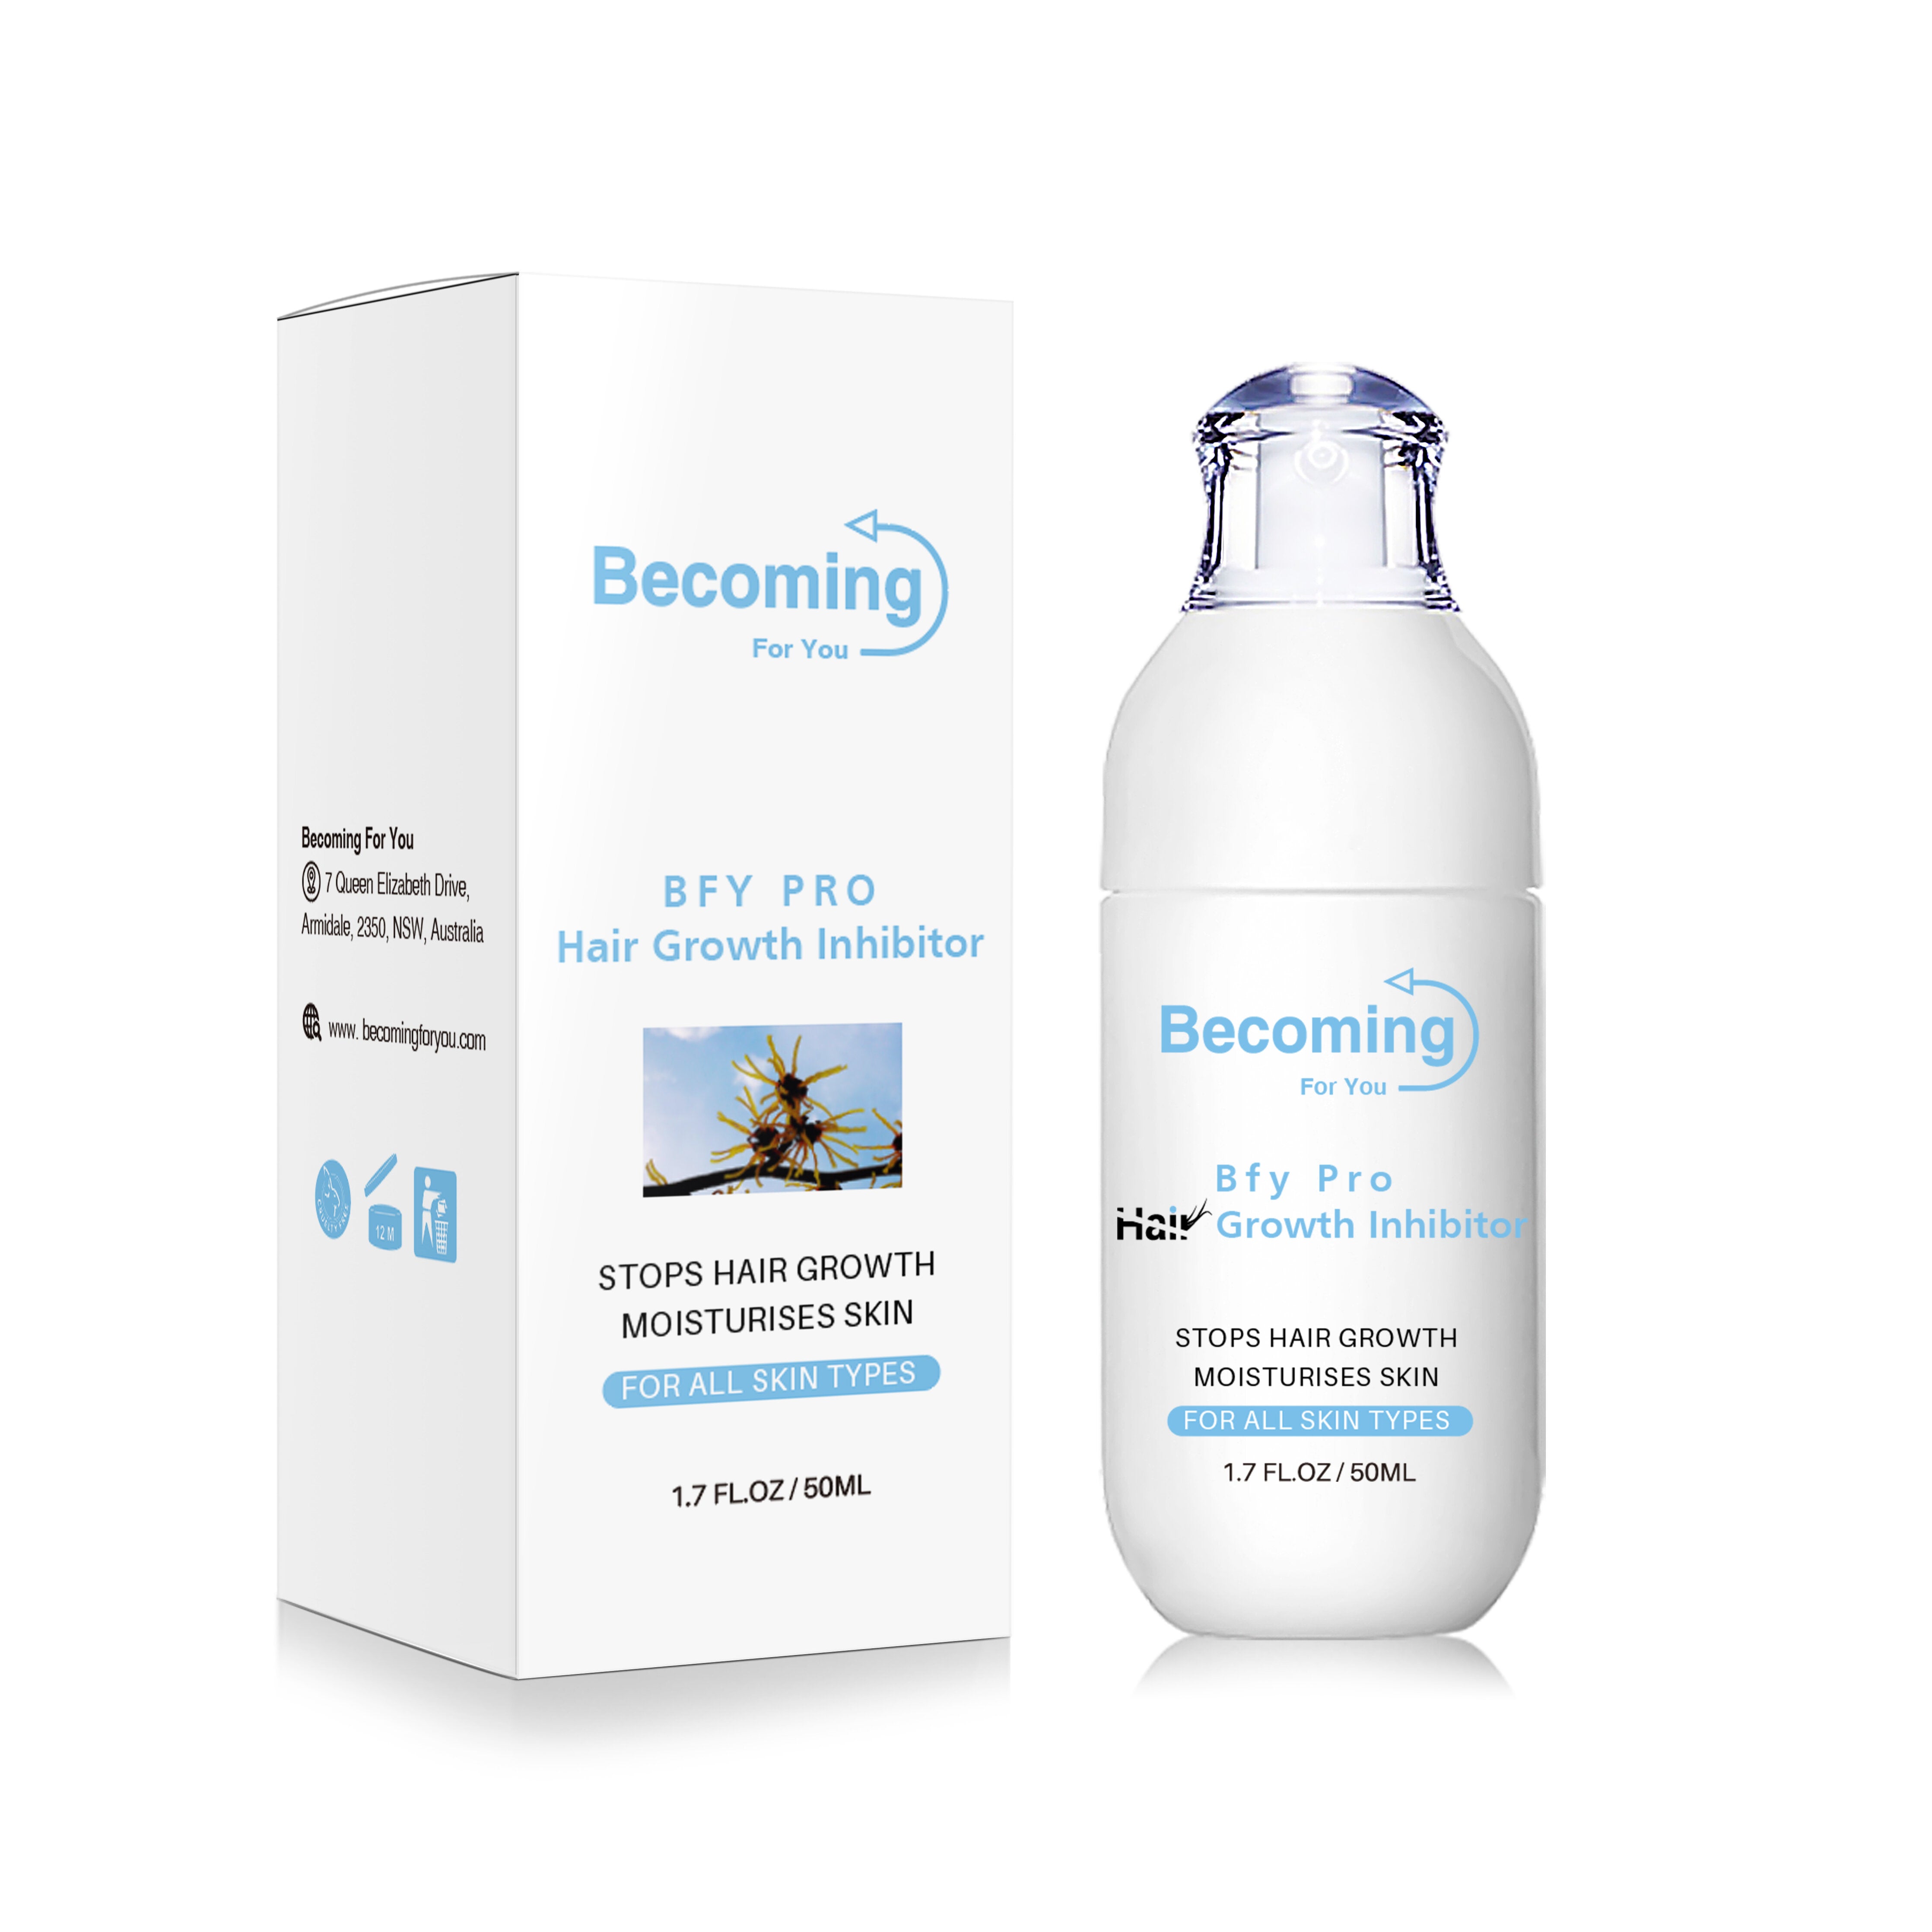 Bfy Pro Hair Removal & Hair Growth Inhibitor Set